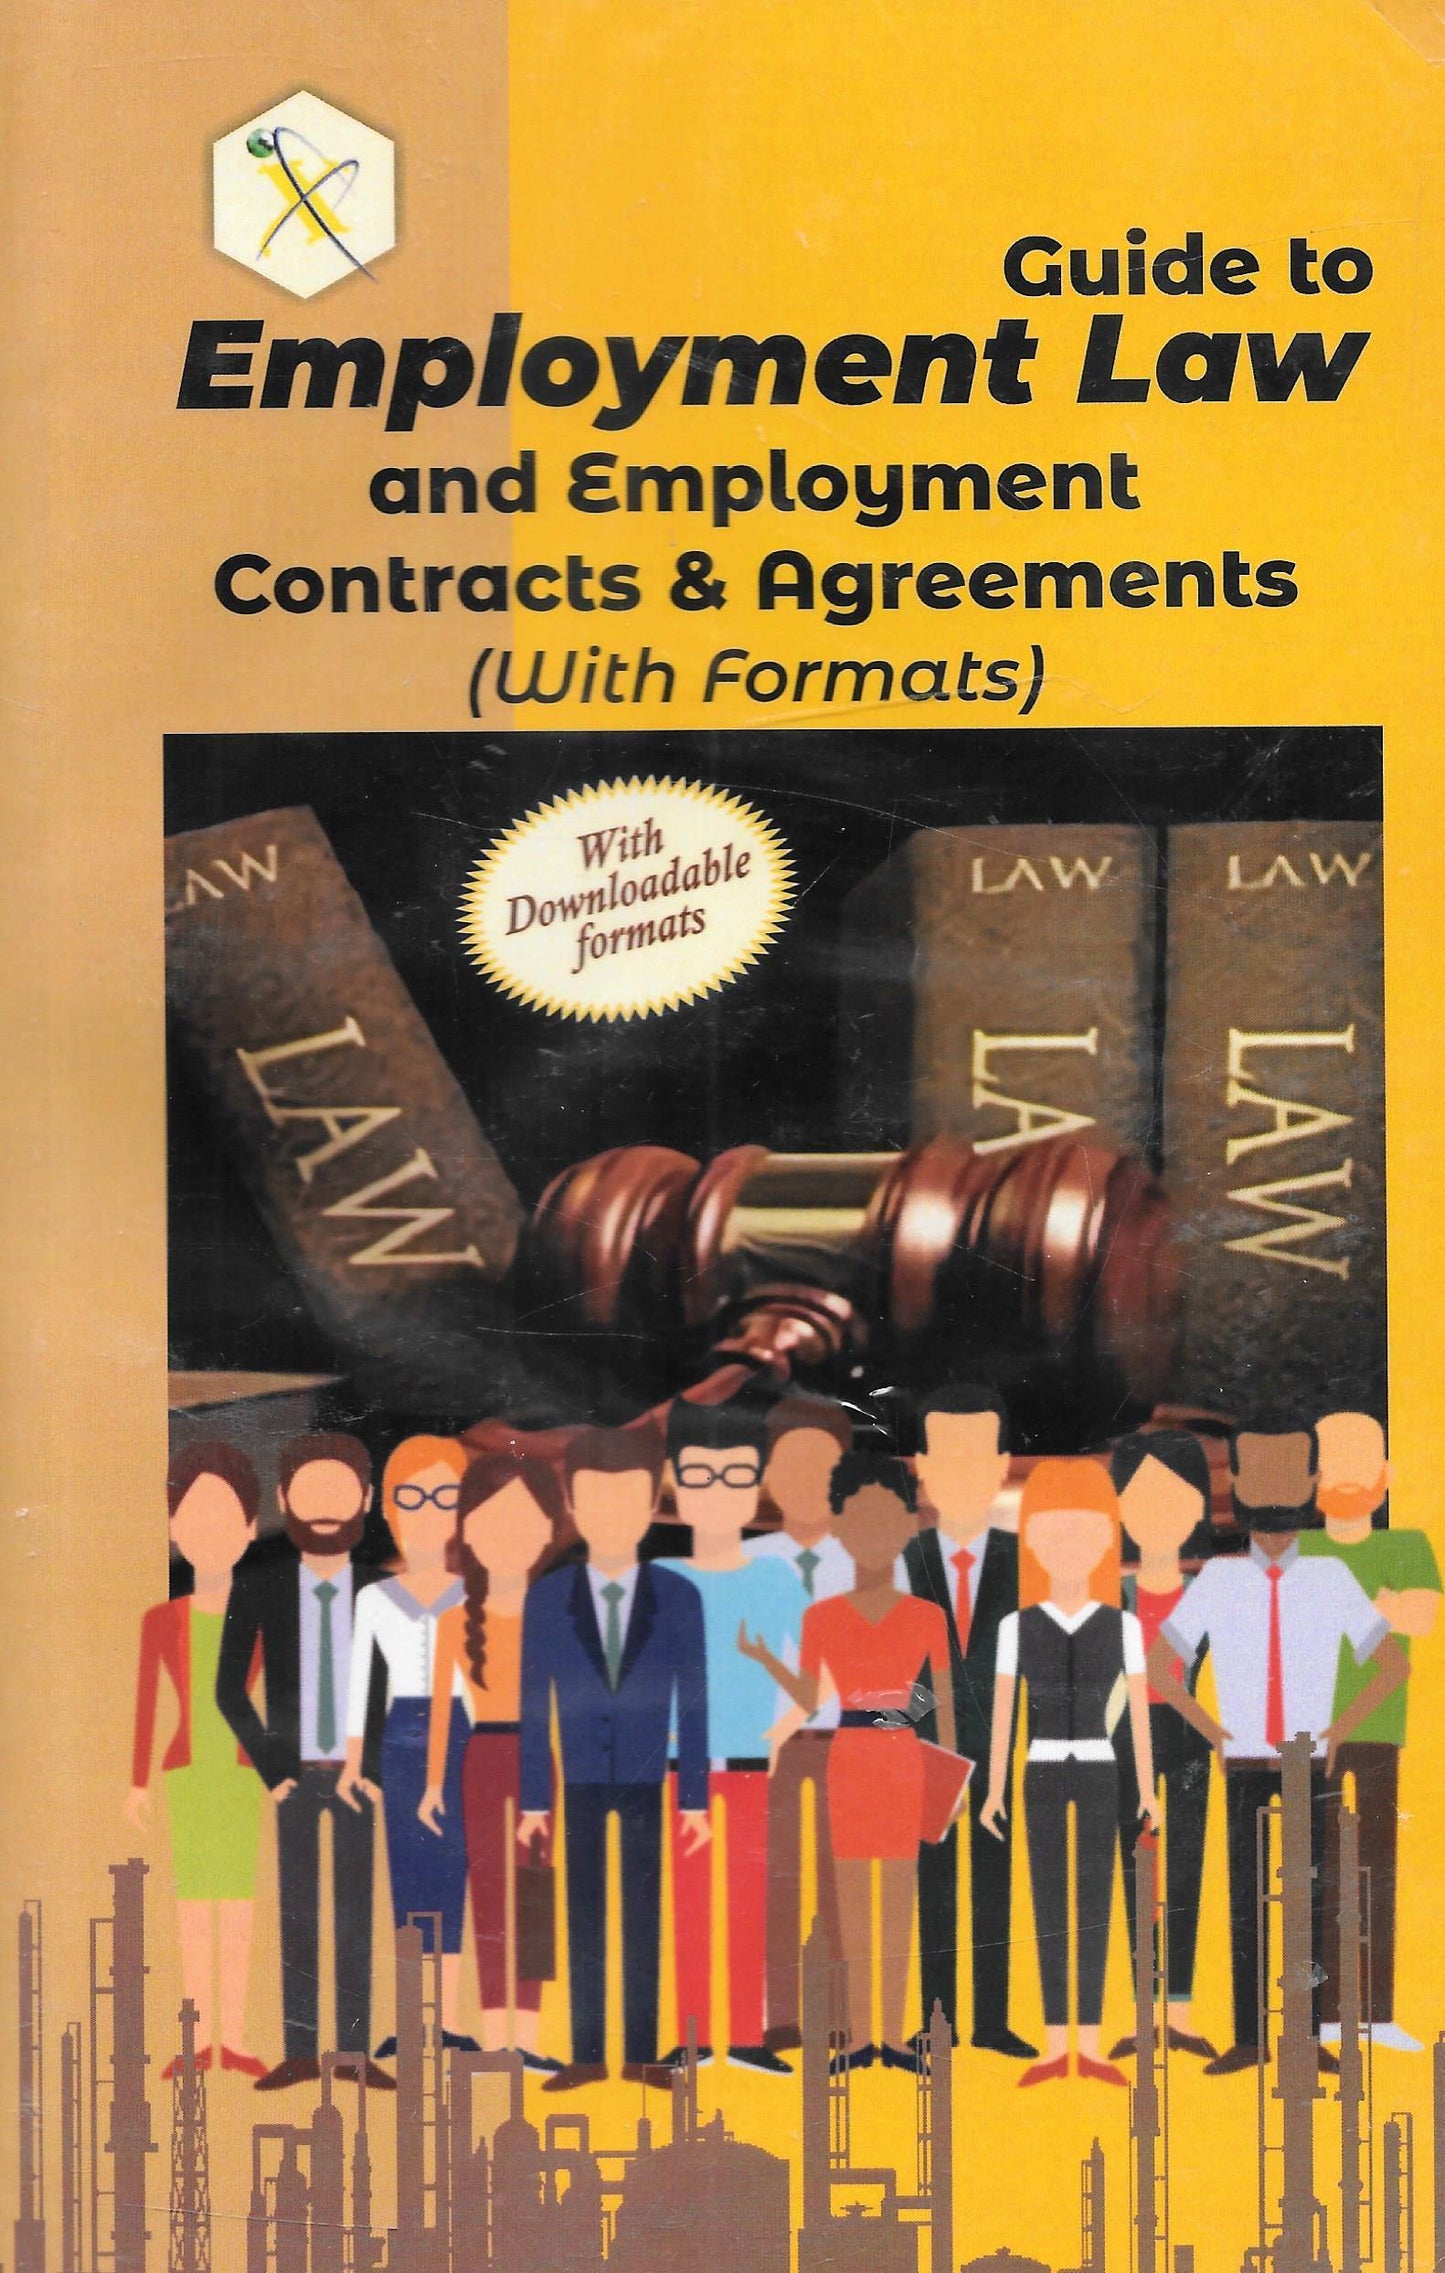 Guide to Employment Law and Employment Contracts and Agreements - M&J Services